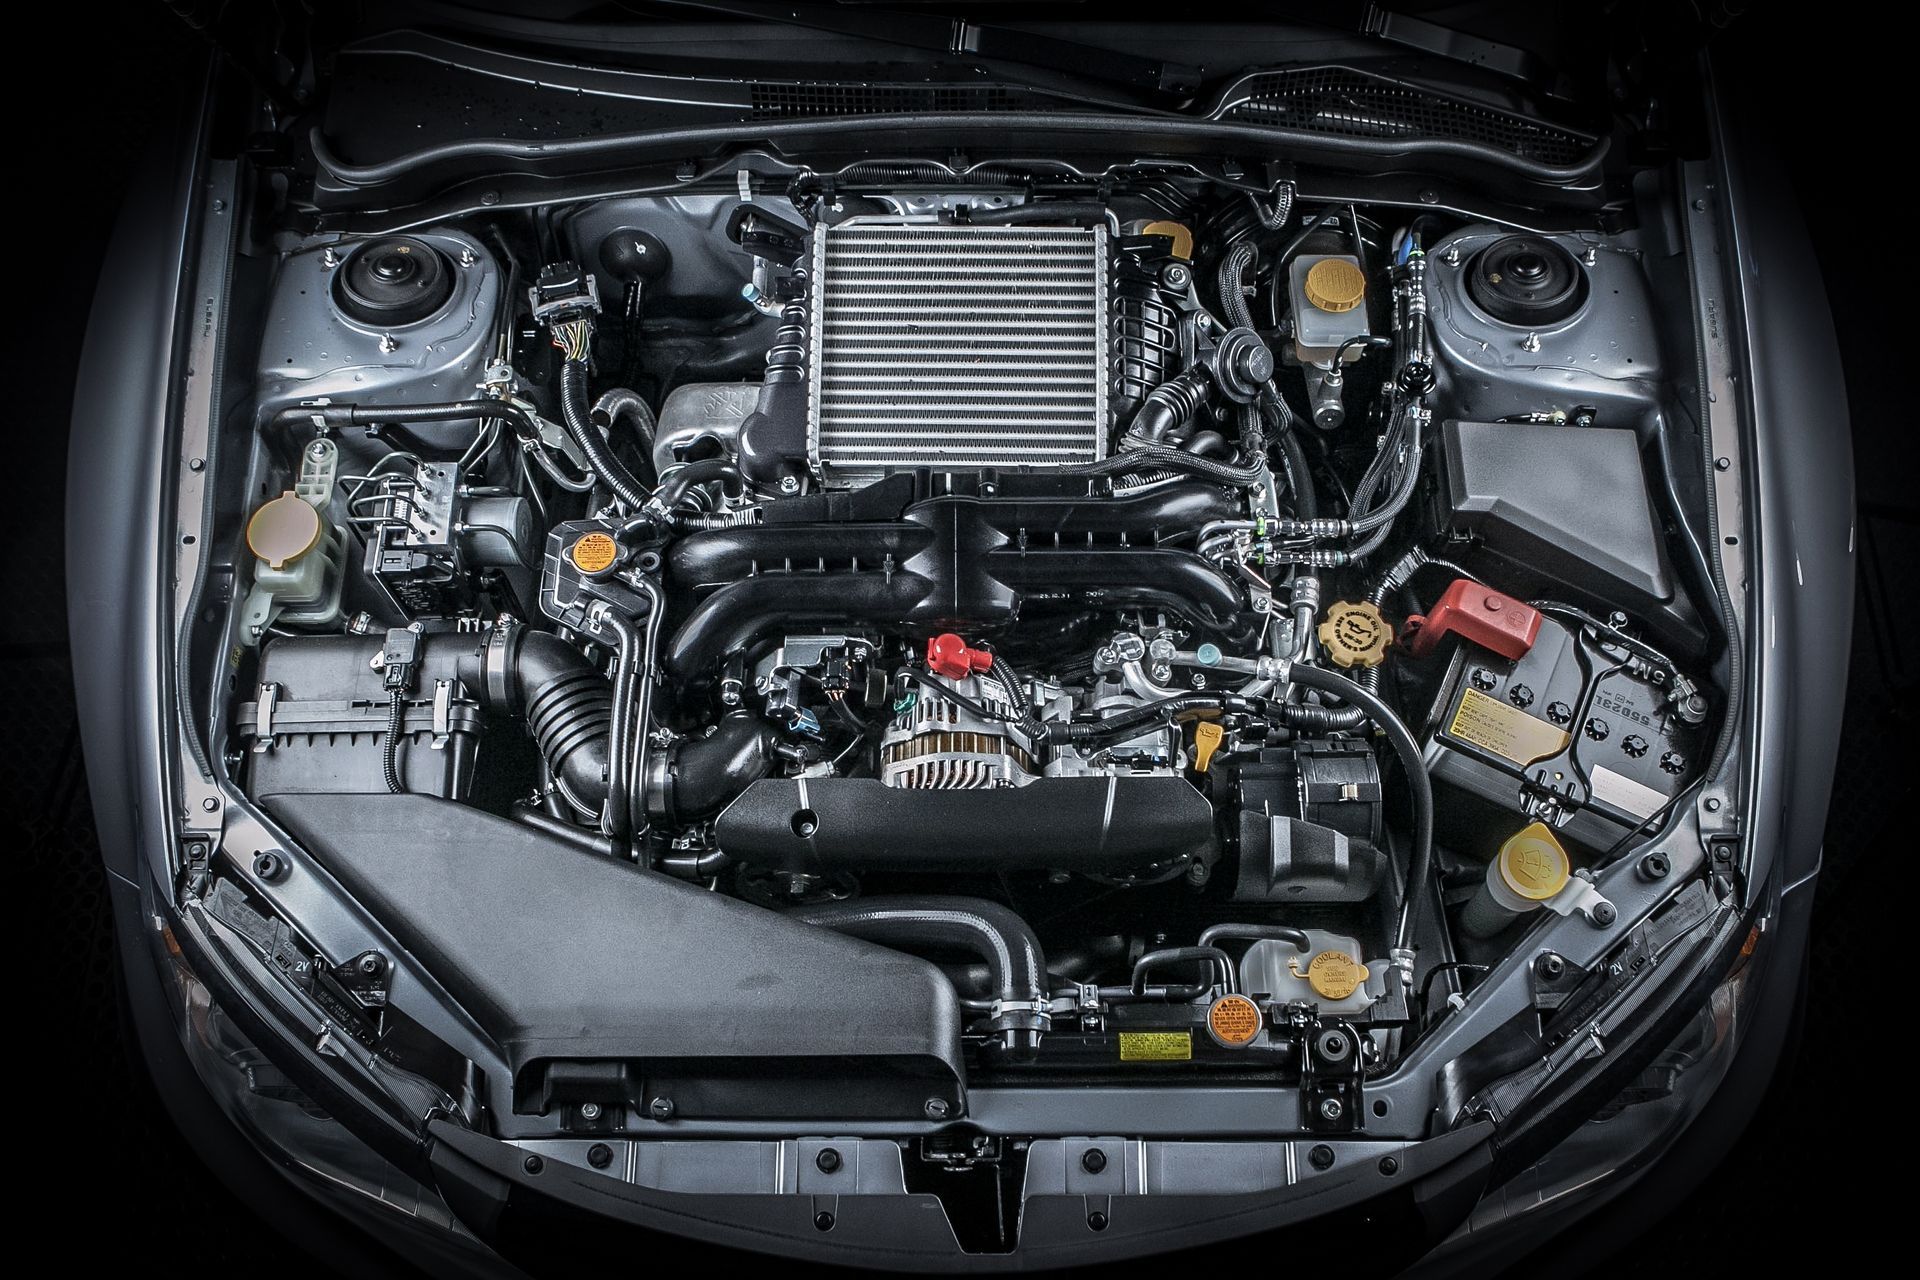 How Does High Altitude in Colorado Affect Car Engines? | BG Automotive